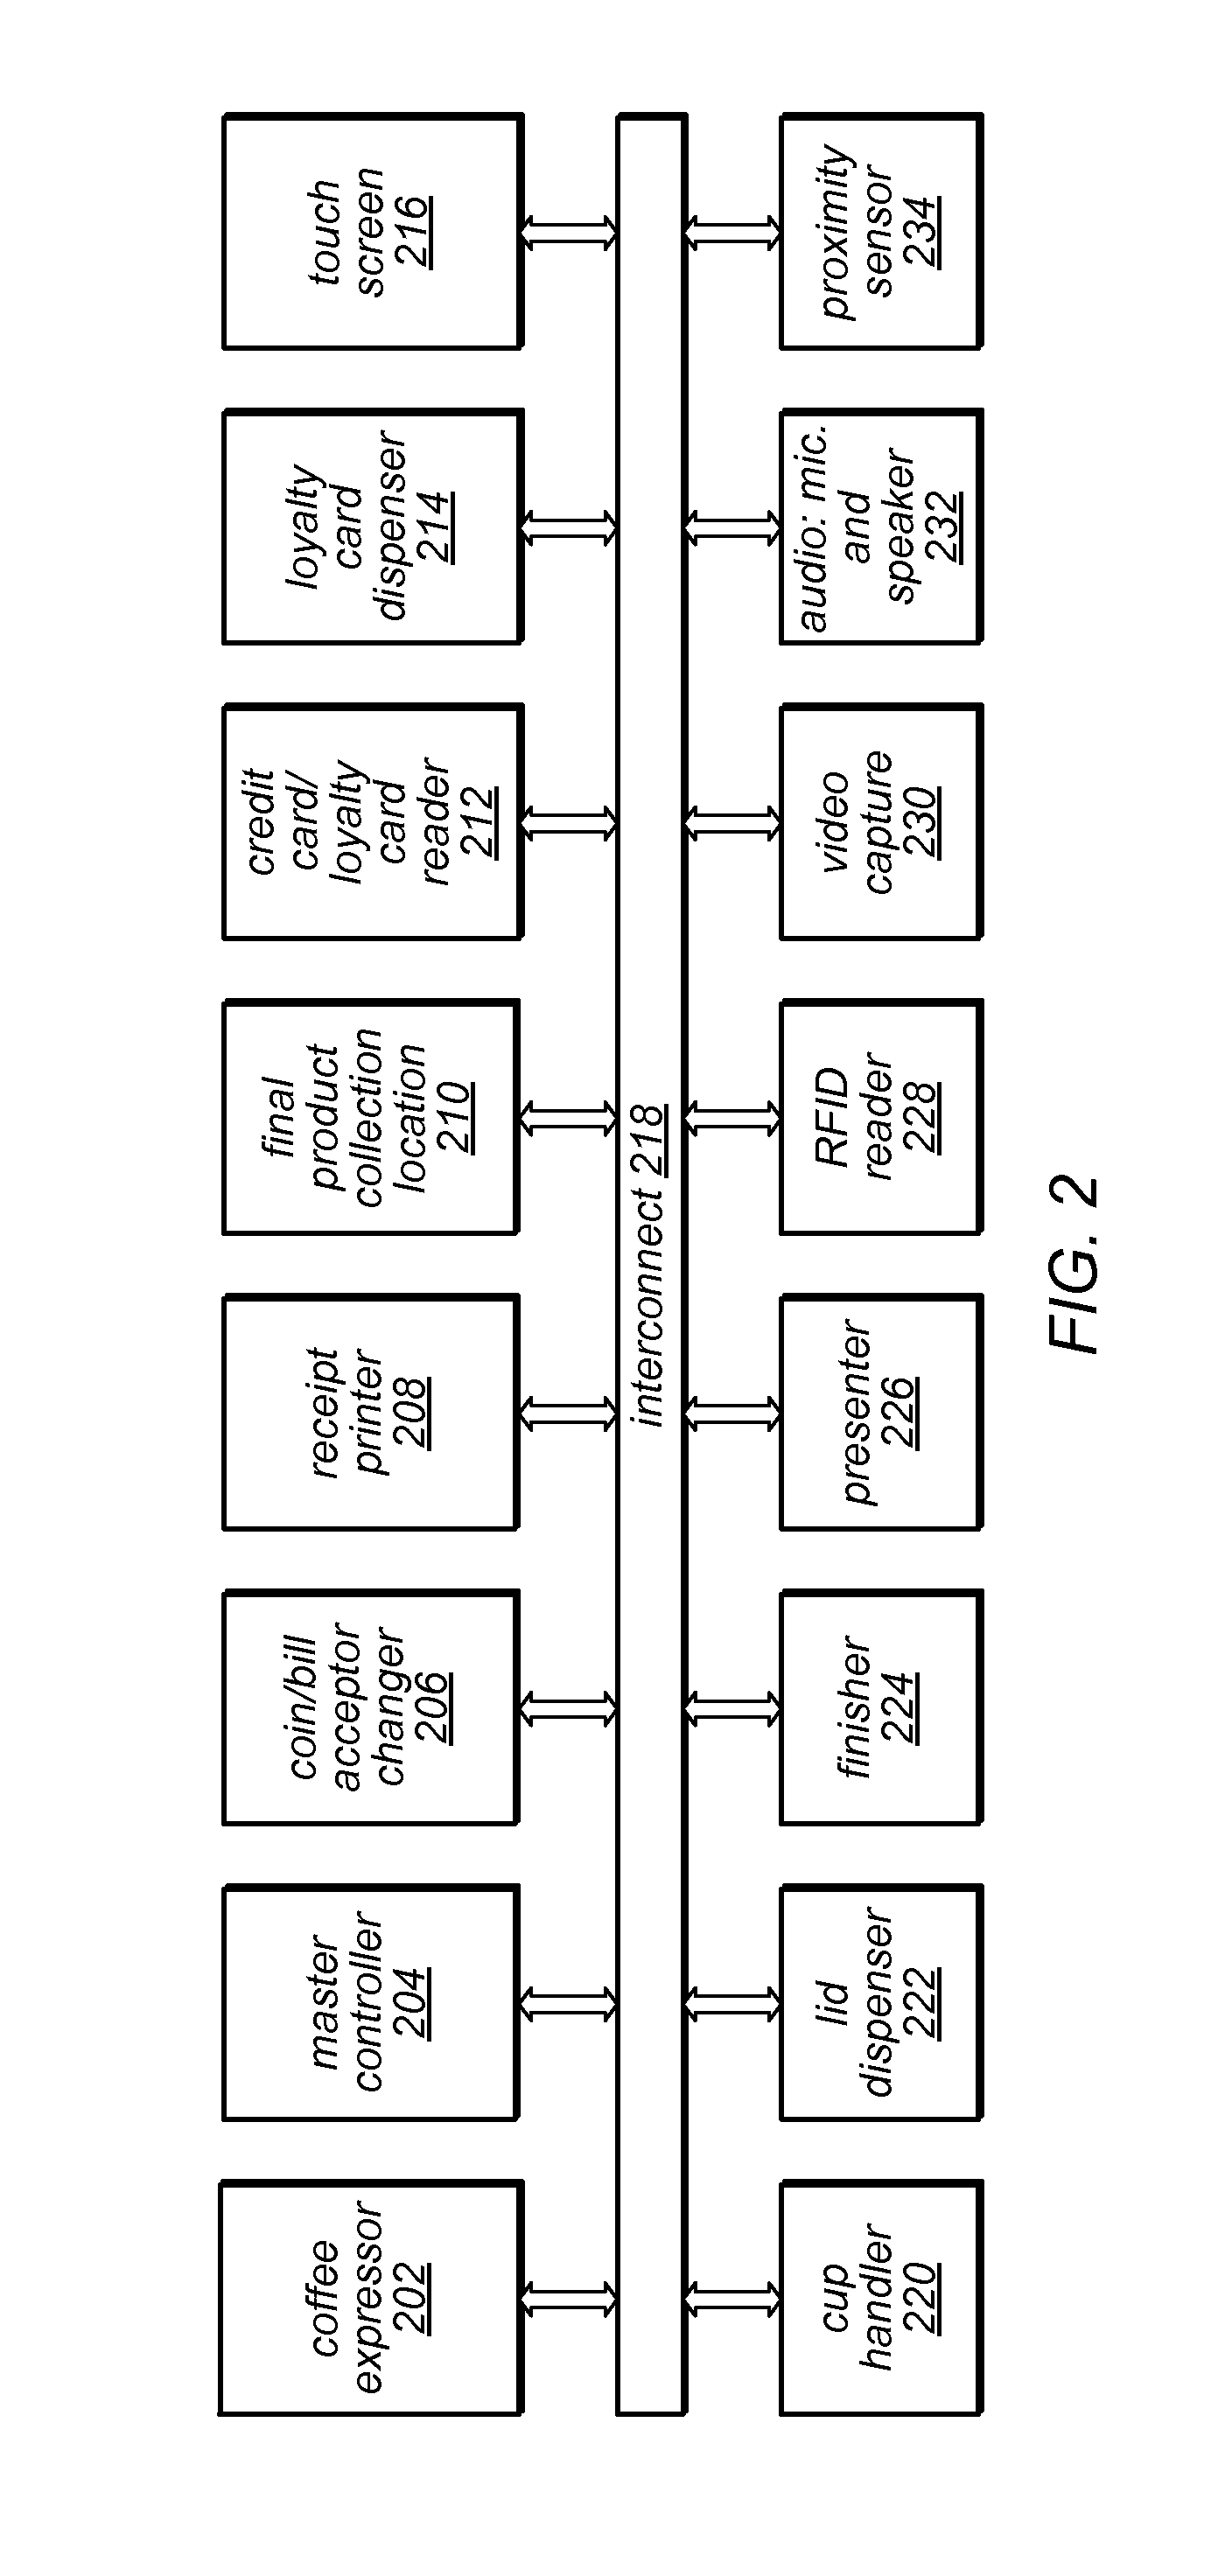 System and Method for Managing the Generation of Brewed Beverages Using Shared Resources